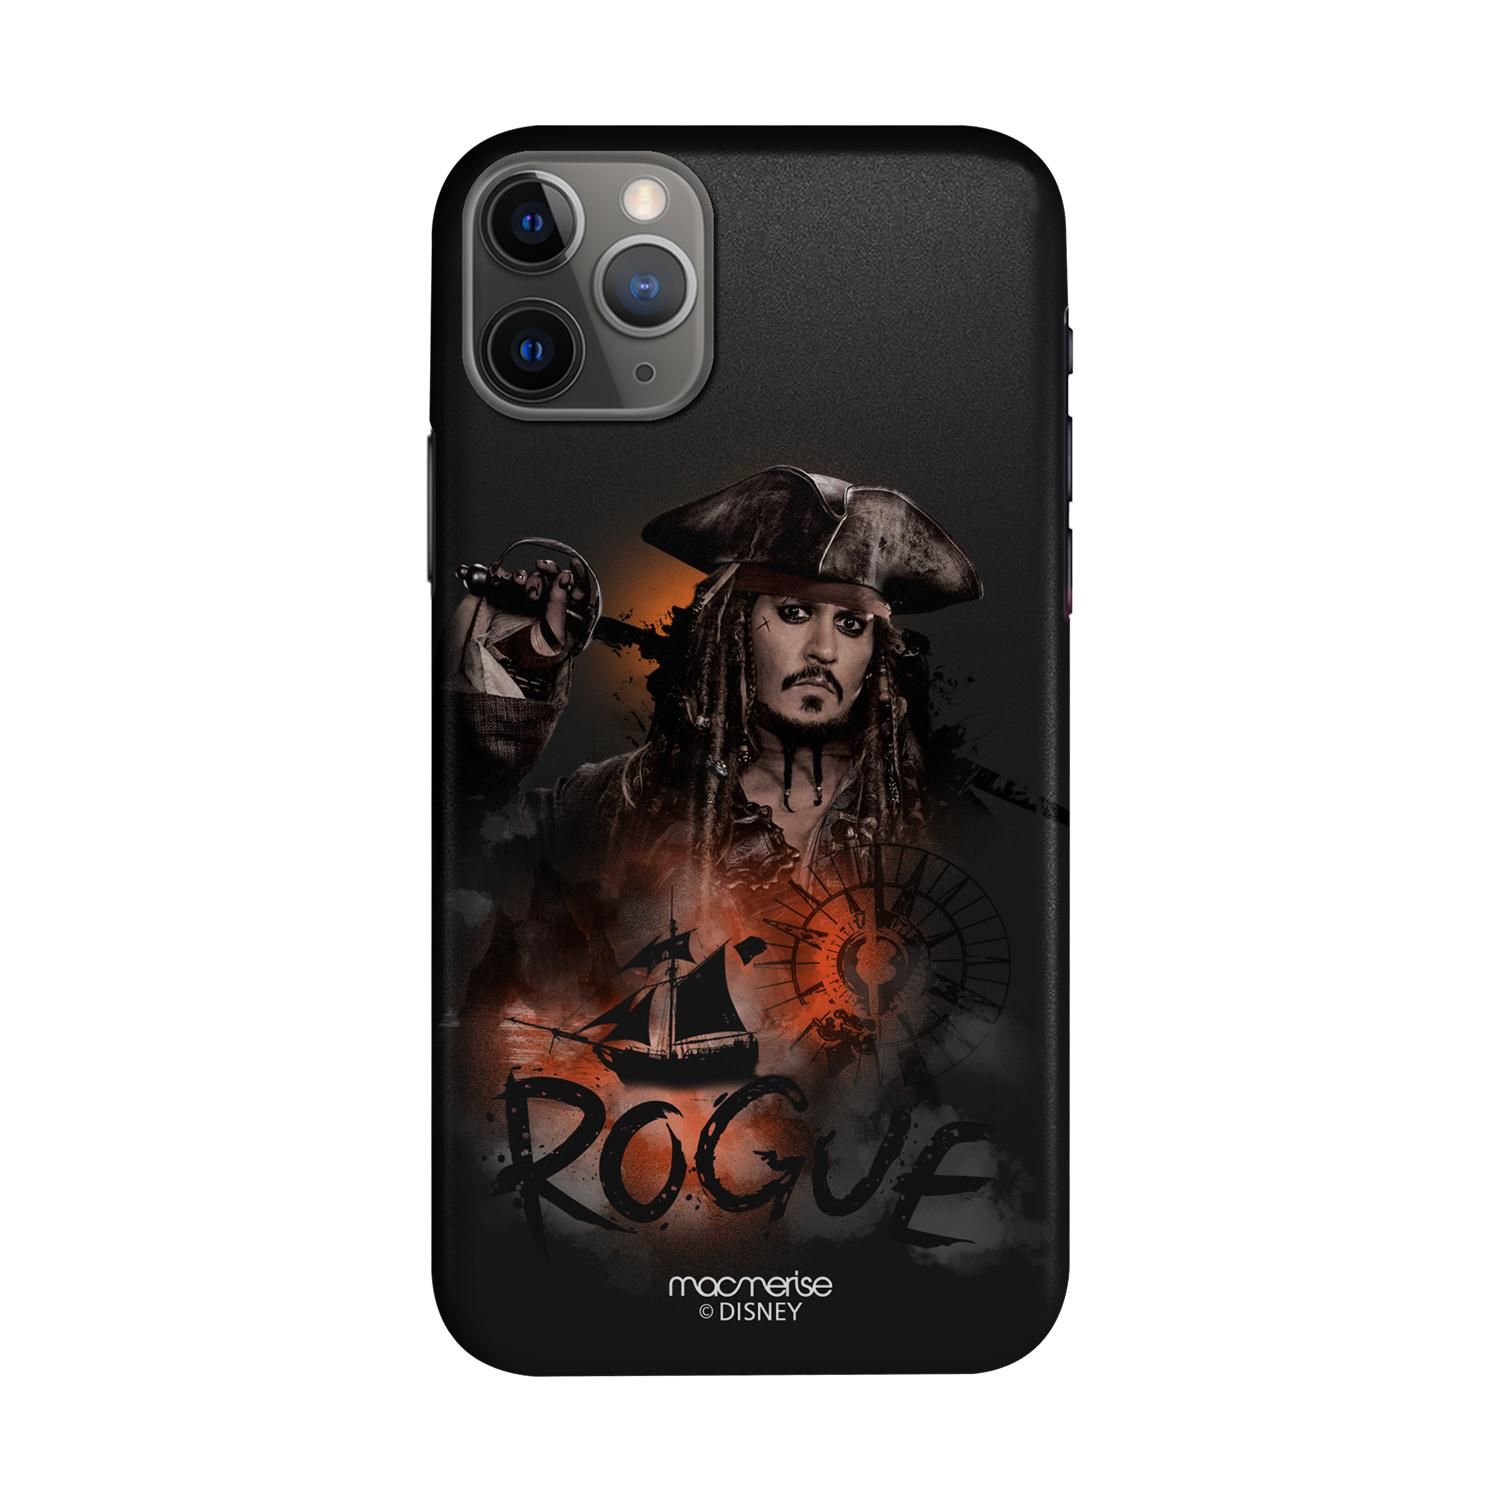 Buy Rogue Jack - Sleek Phone Case for iPhone 11 Pro Max Online